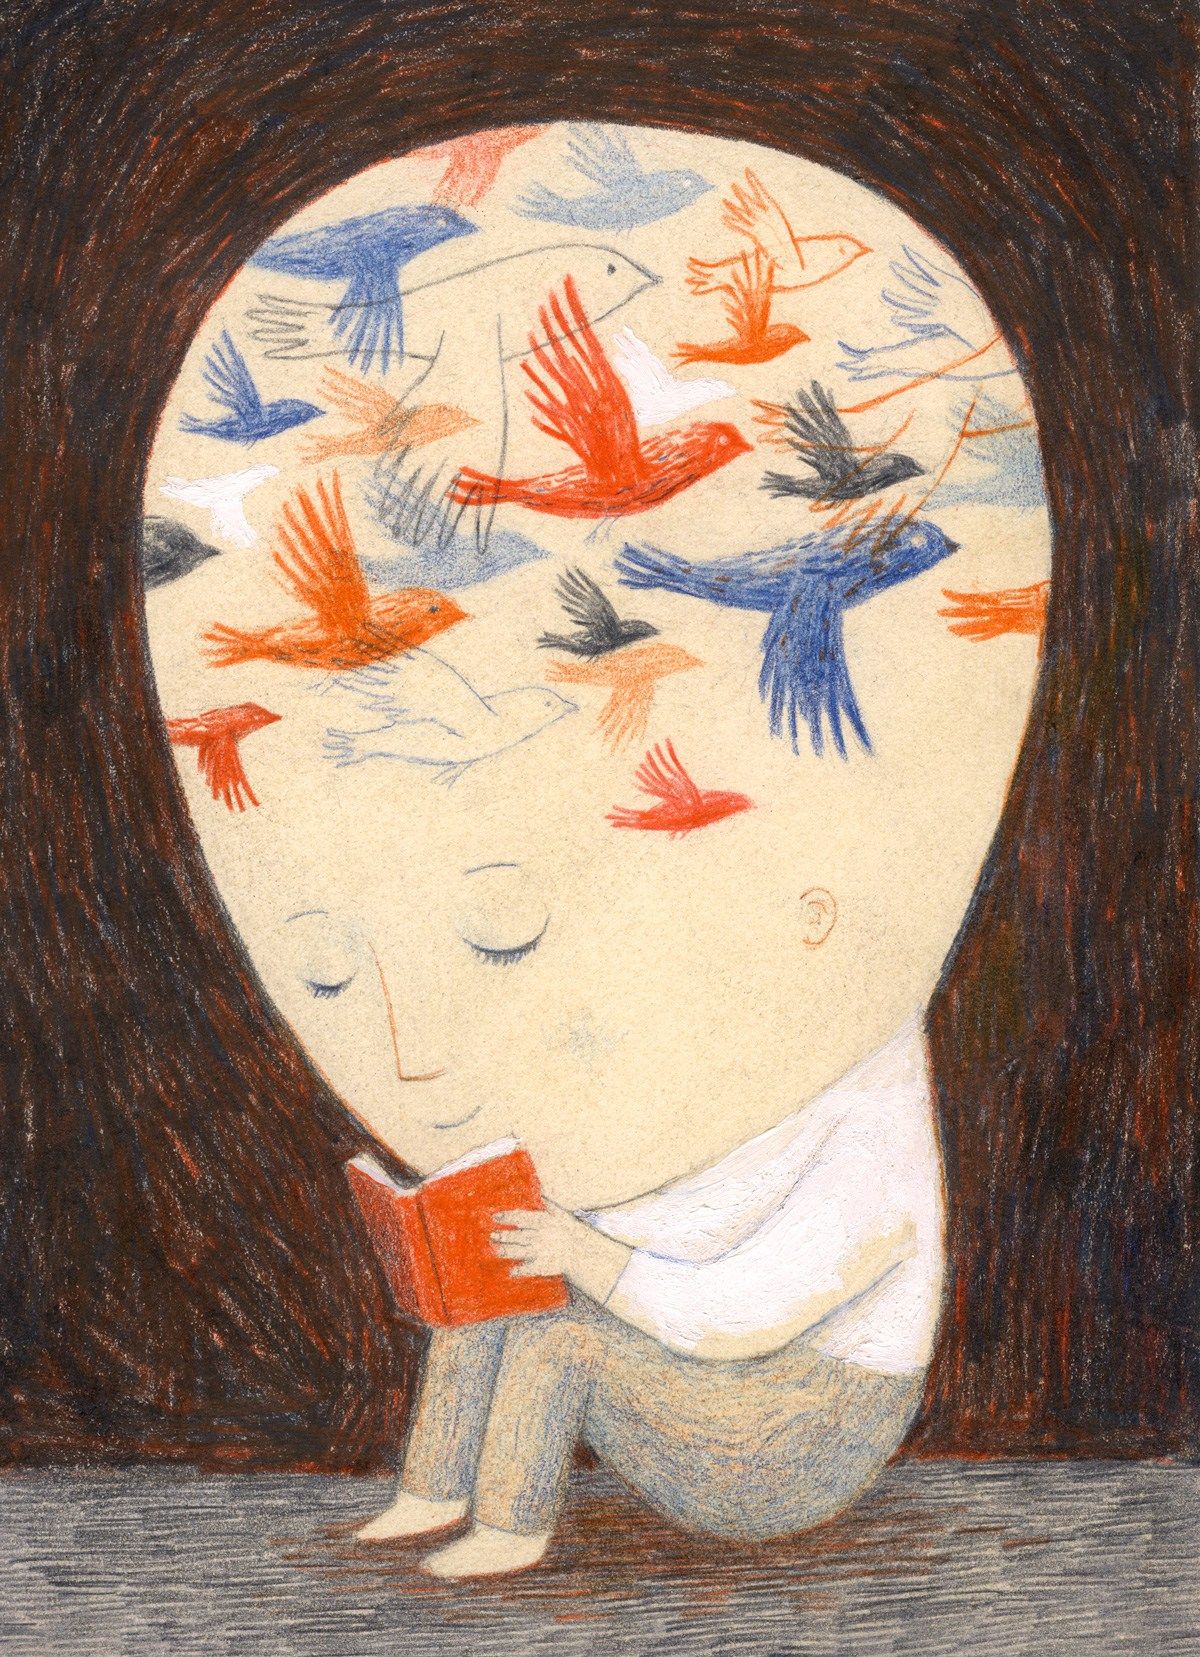 Arte de Ofra Amit para A Velocity of Being: Letters to a Young Reader.